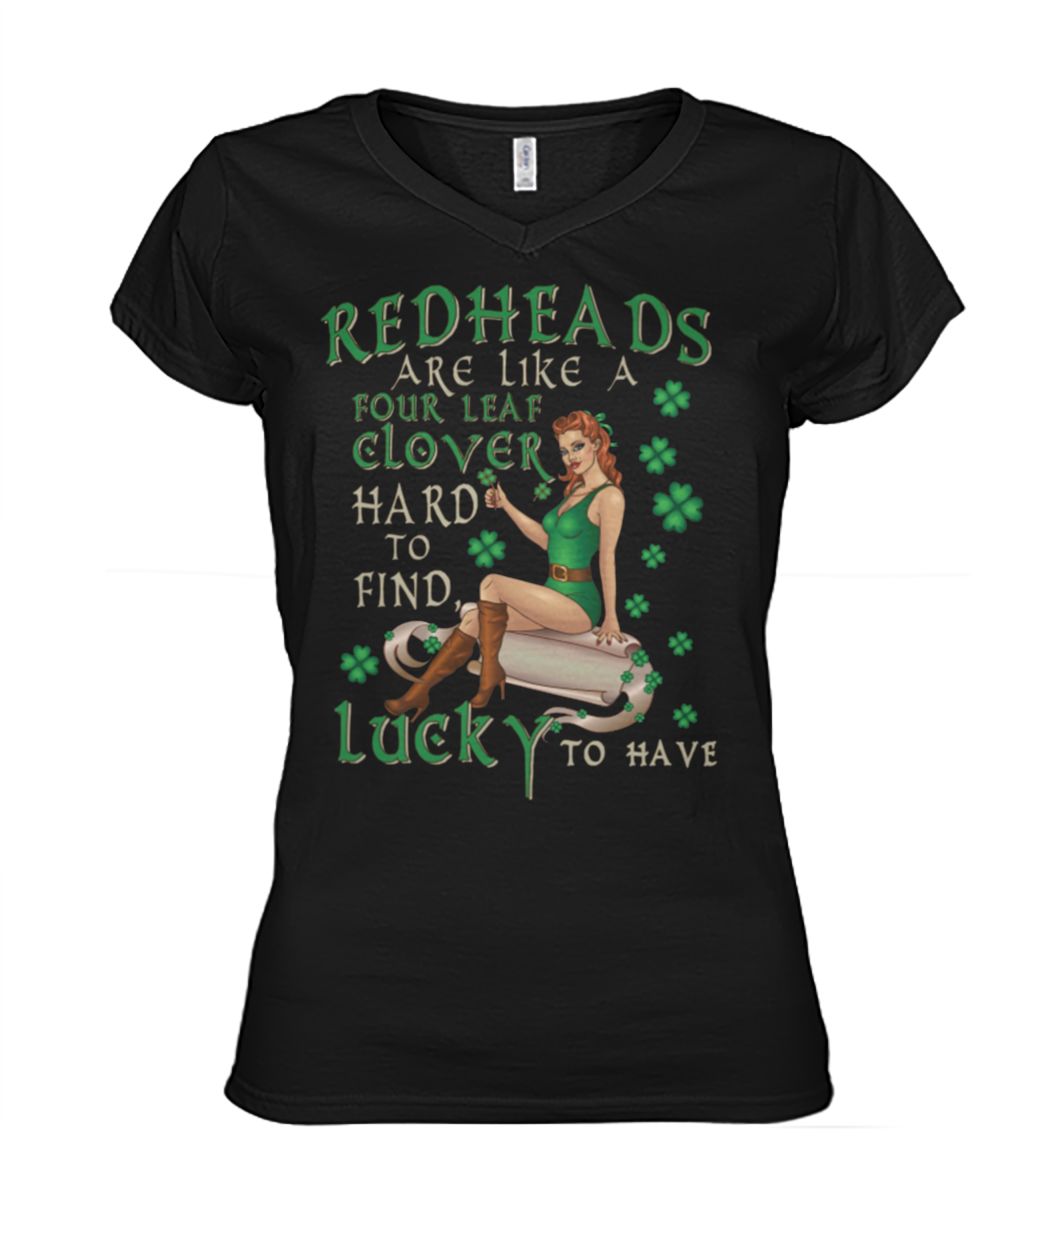 Redheads are like a four leaf clover hard to find lucky to have women's v-neck